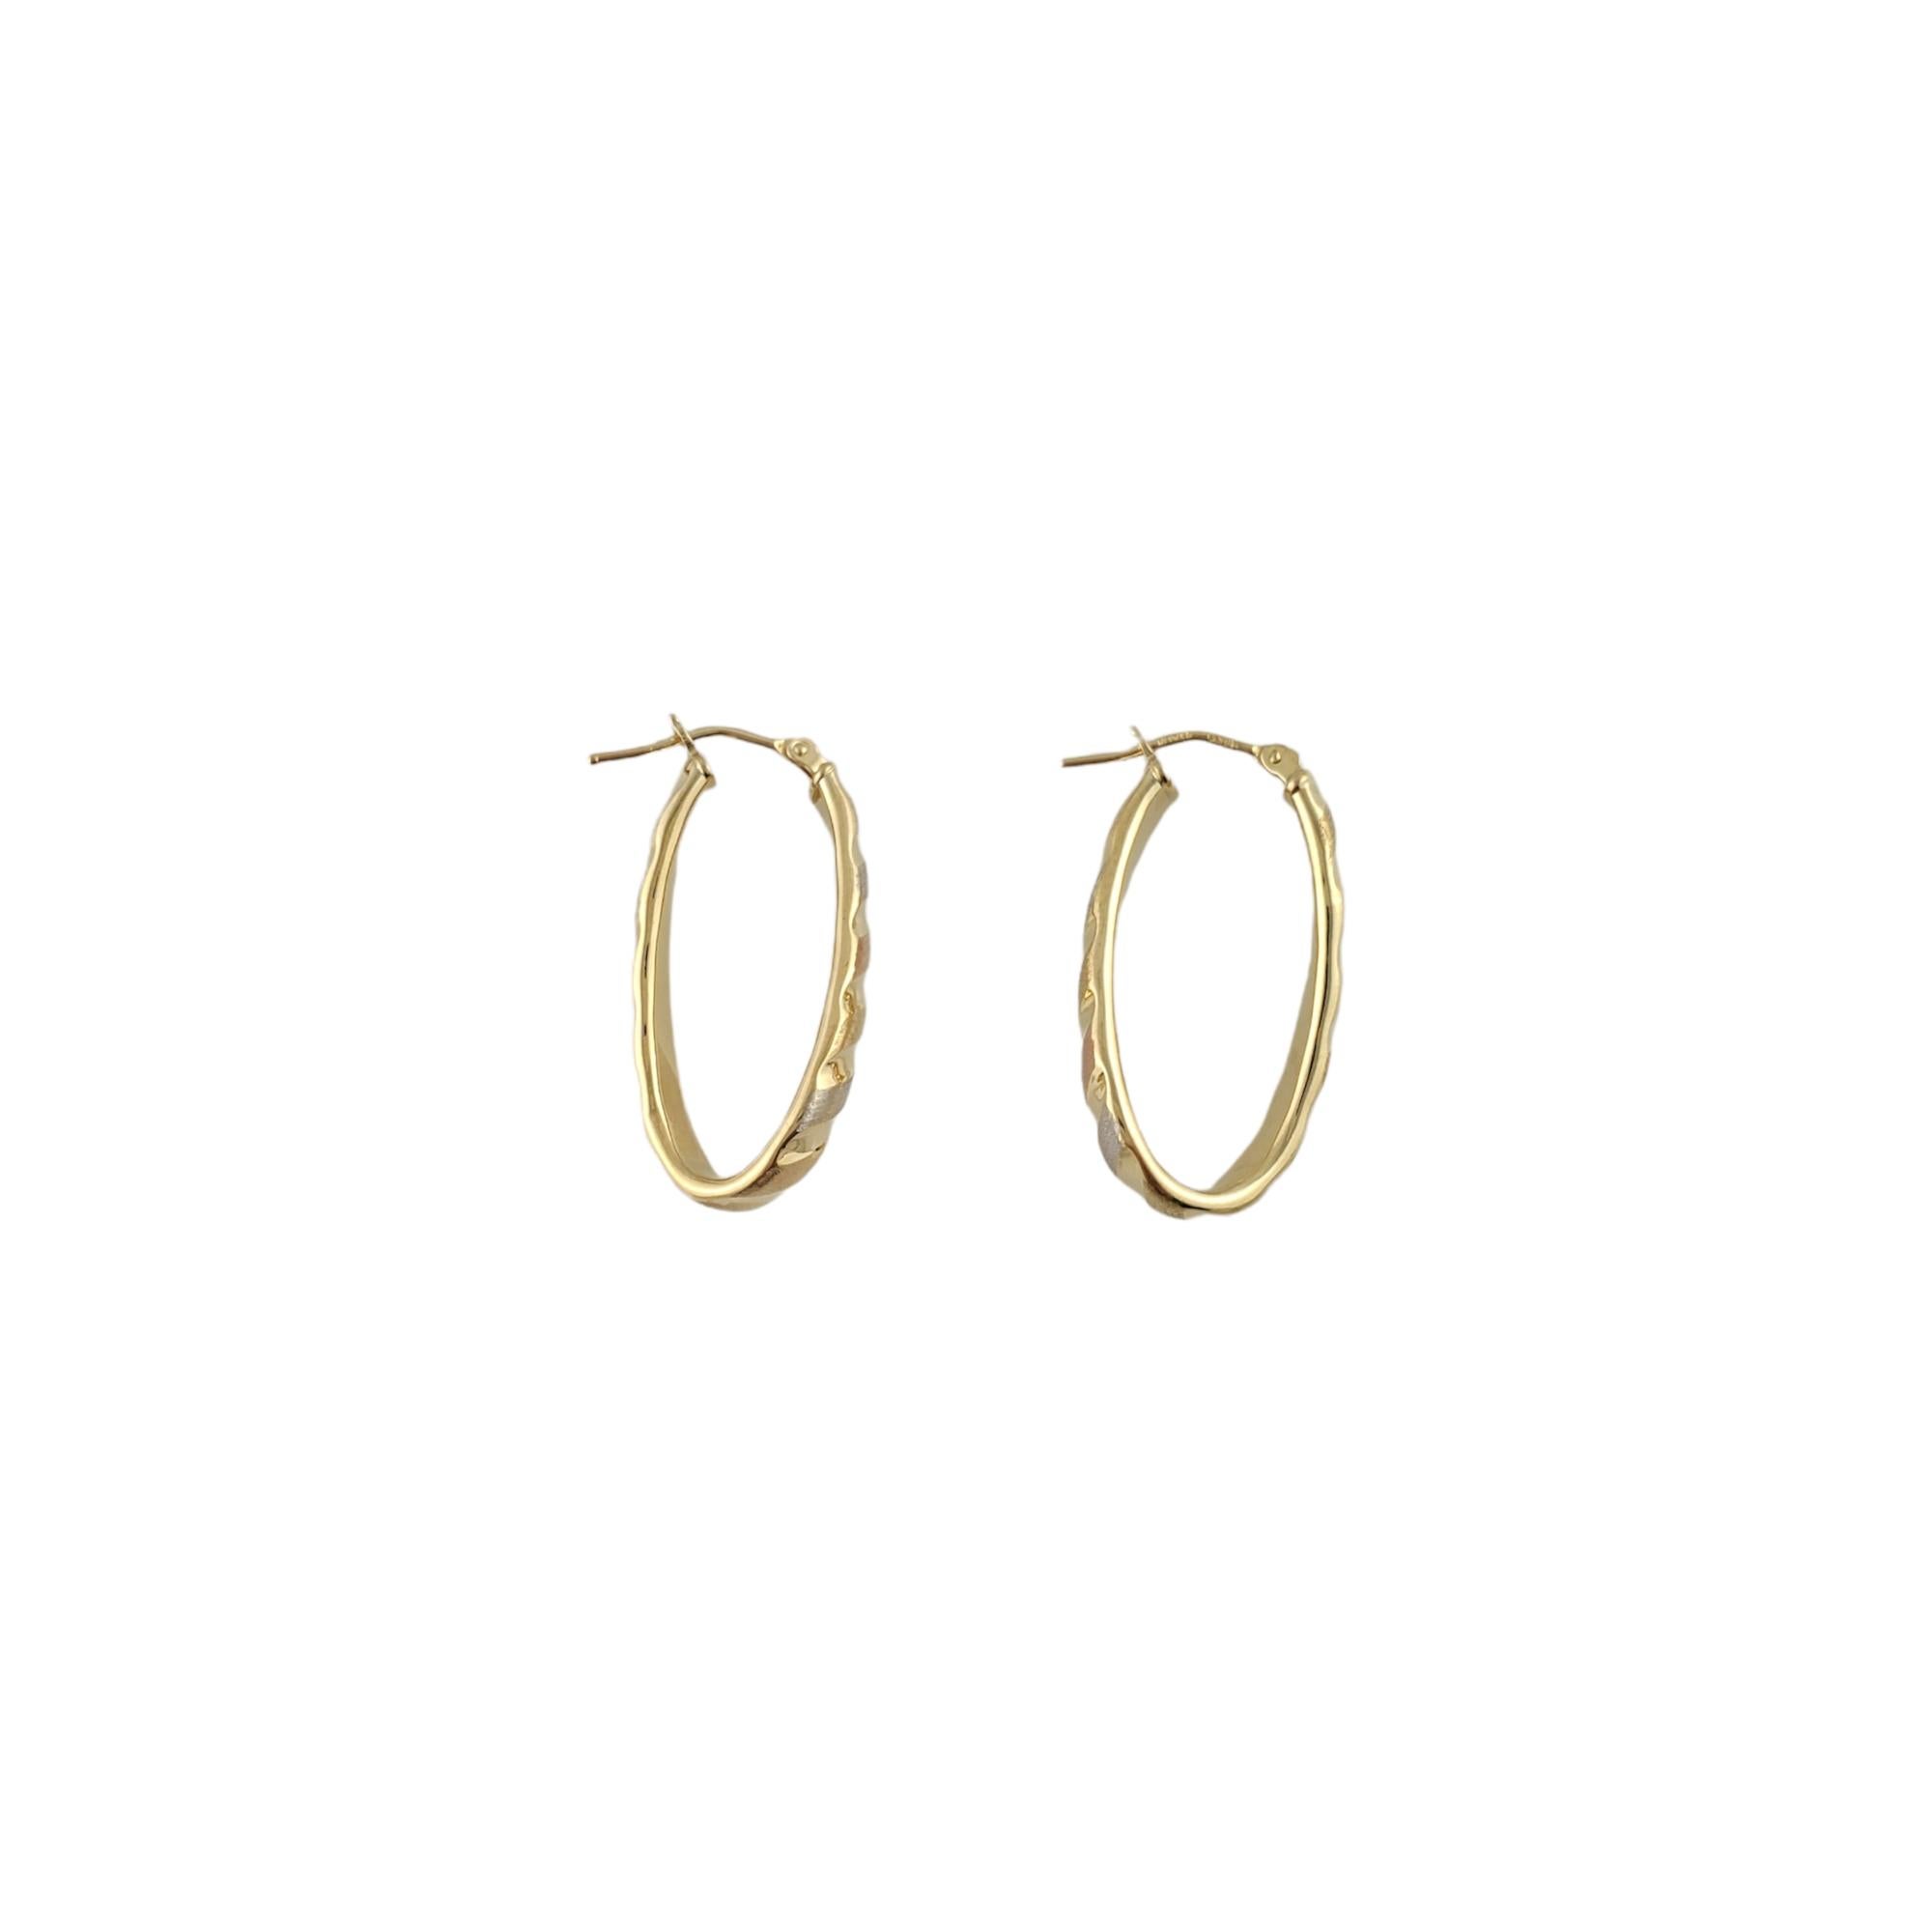 18K Tri Color Gold Oblong Hoop Earrings

Beautiful oblong hoop earrings are oval and have a slight twist to the shape. Crafted in 18K gold, shows hints of white, yellow, and rose gold. Perfect for every occasion.

Size: 29.5mm X 19.5mm X